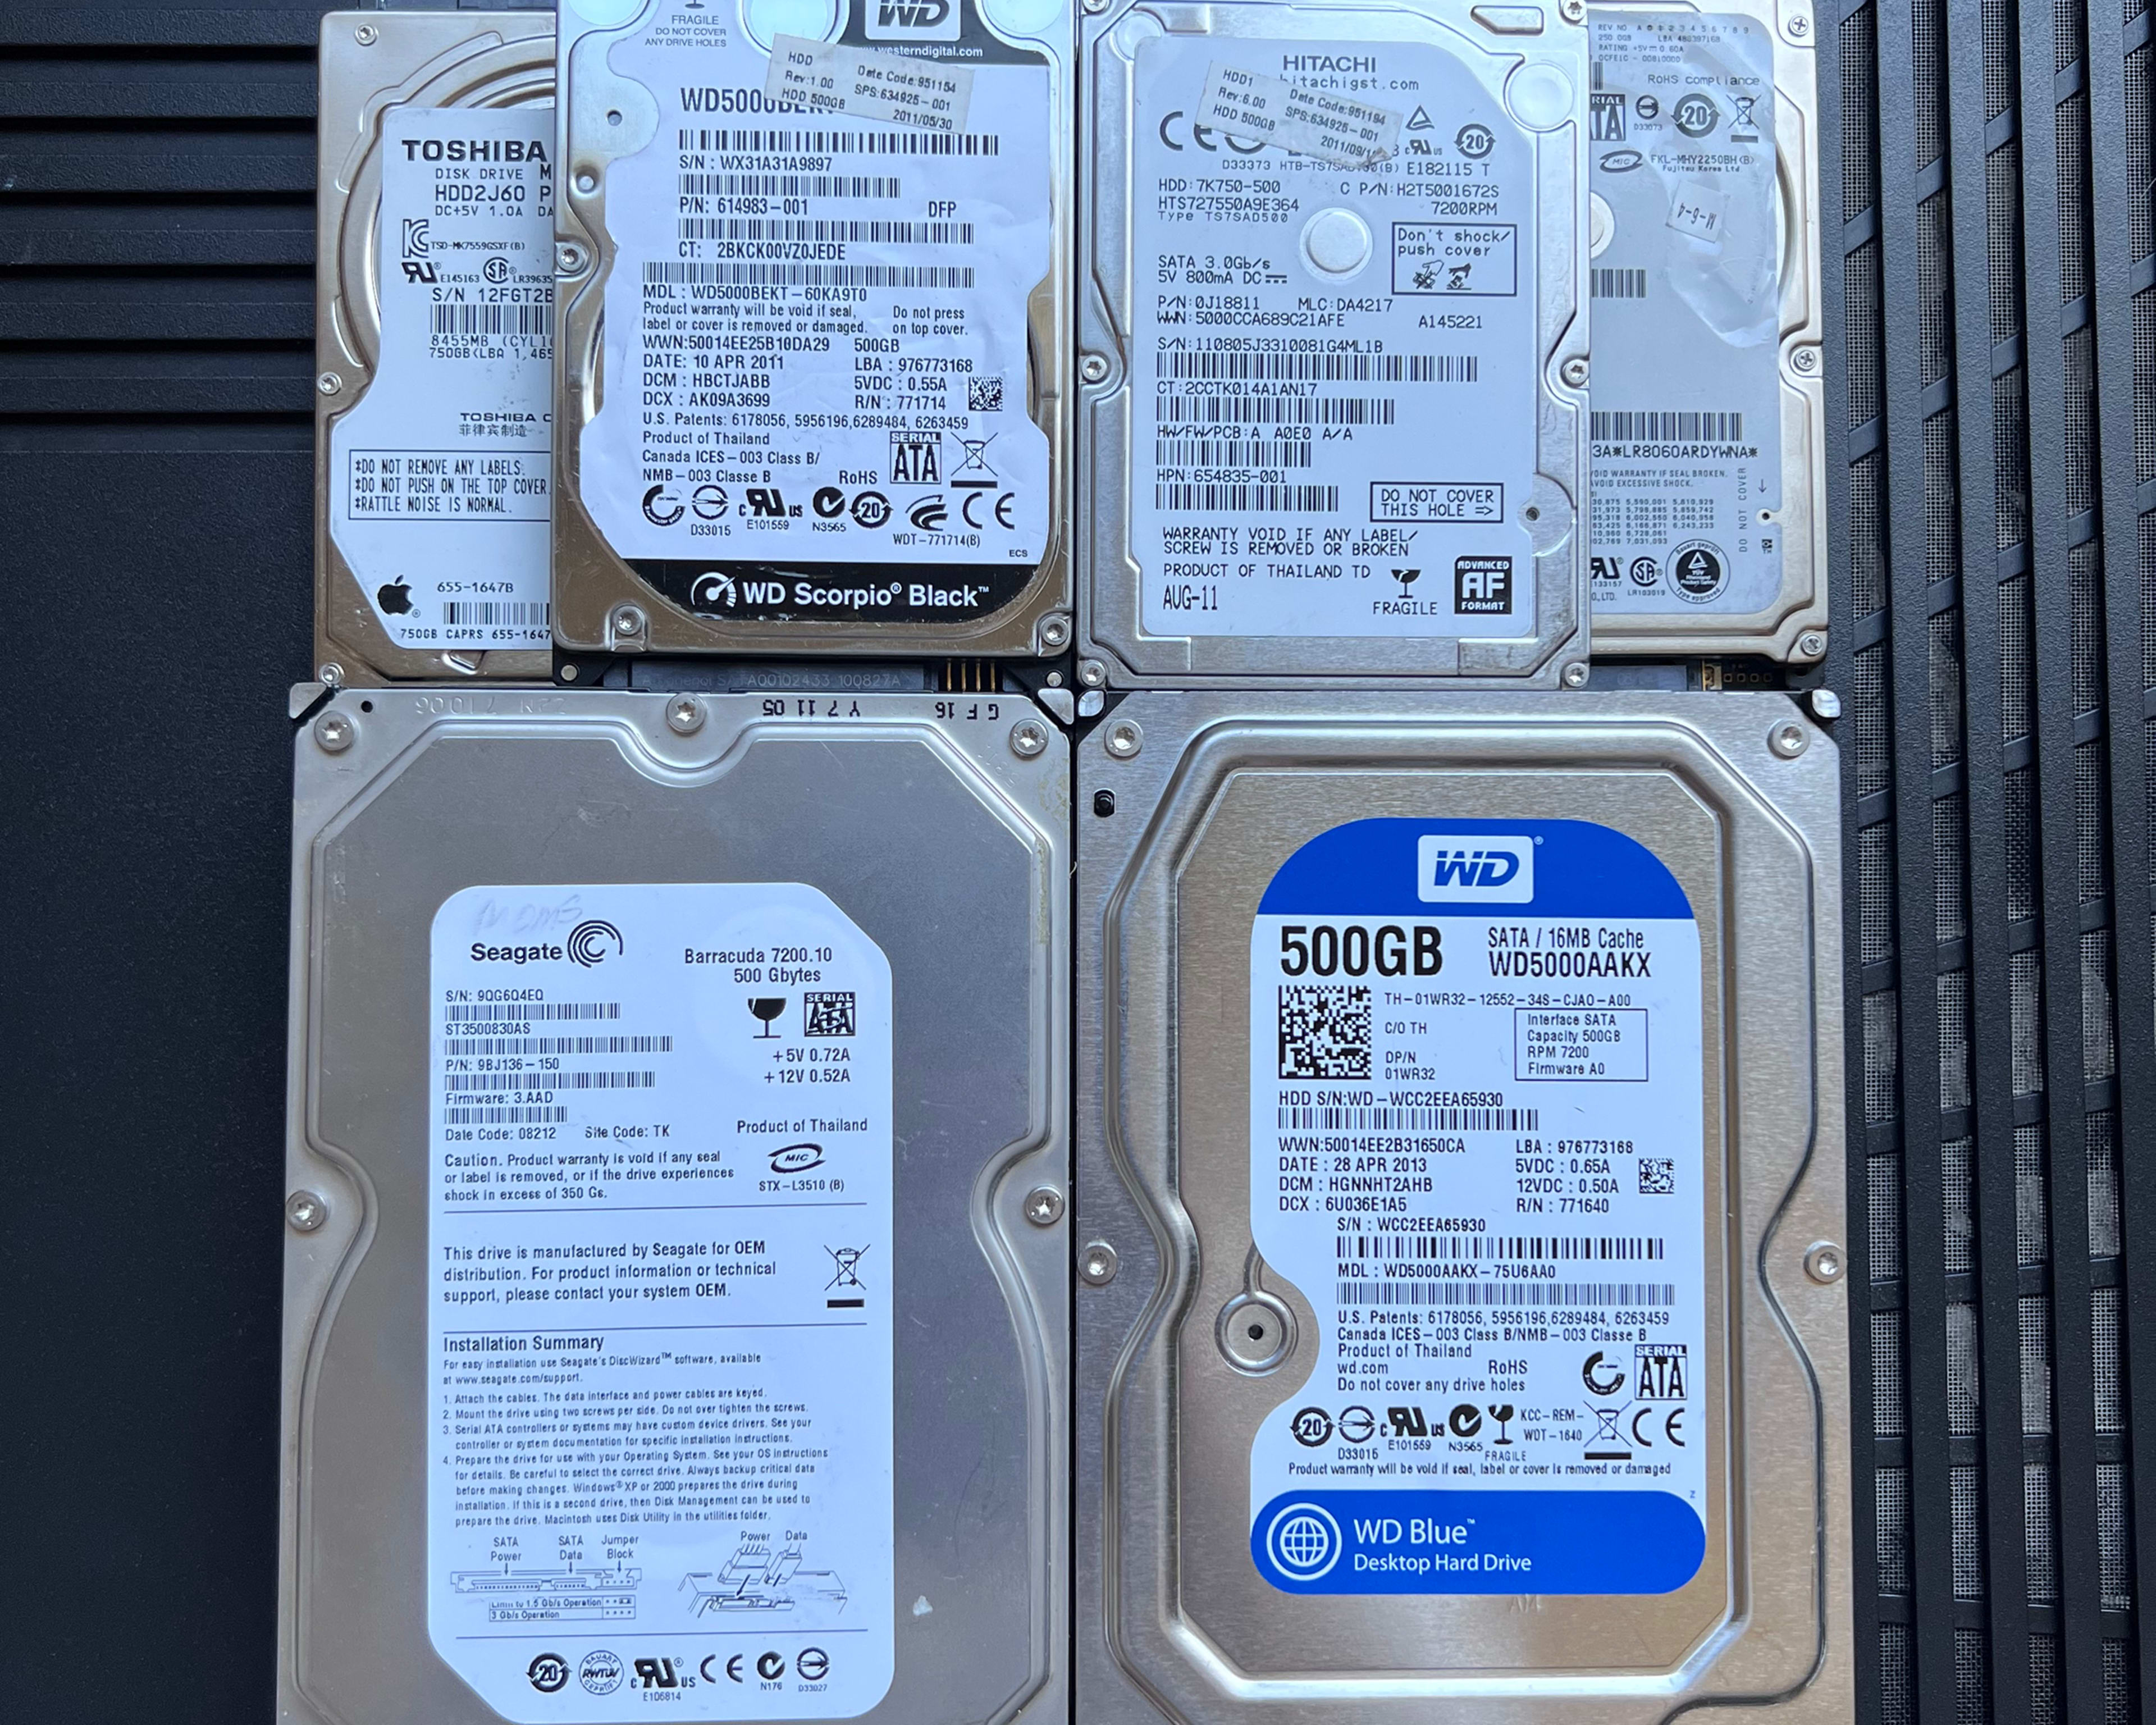 250GB - 500GB - 750GB HDD storages available